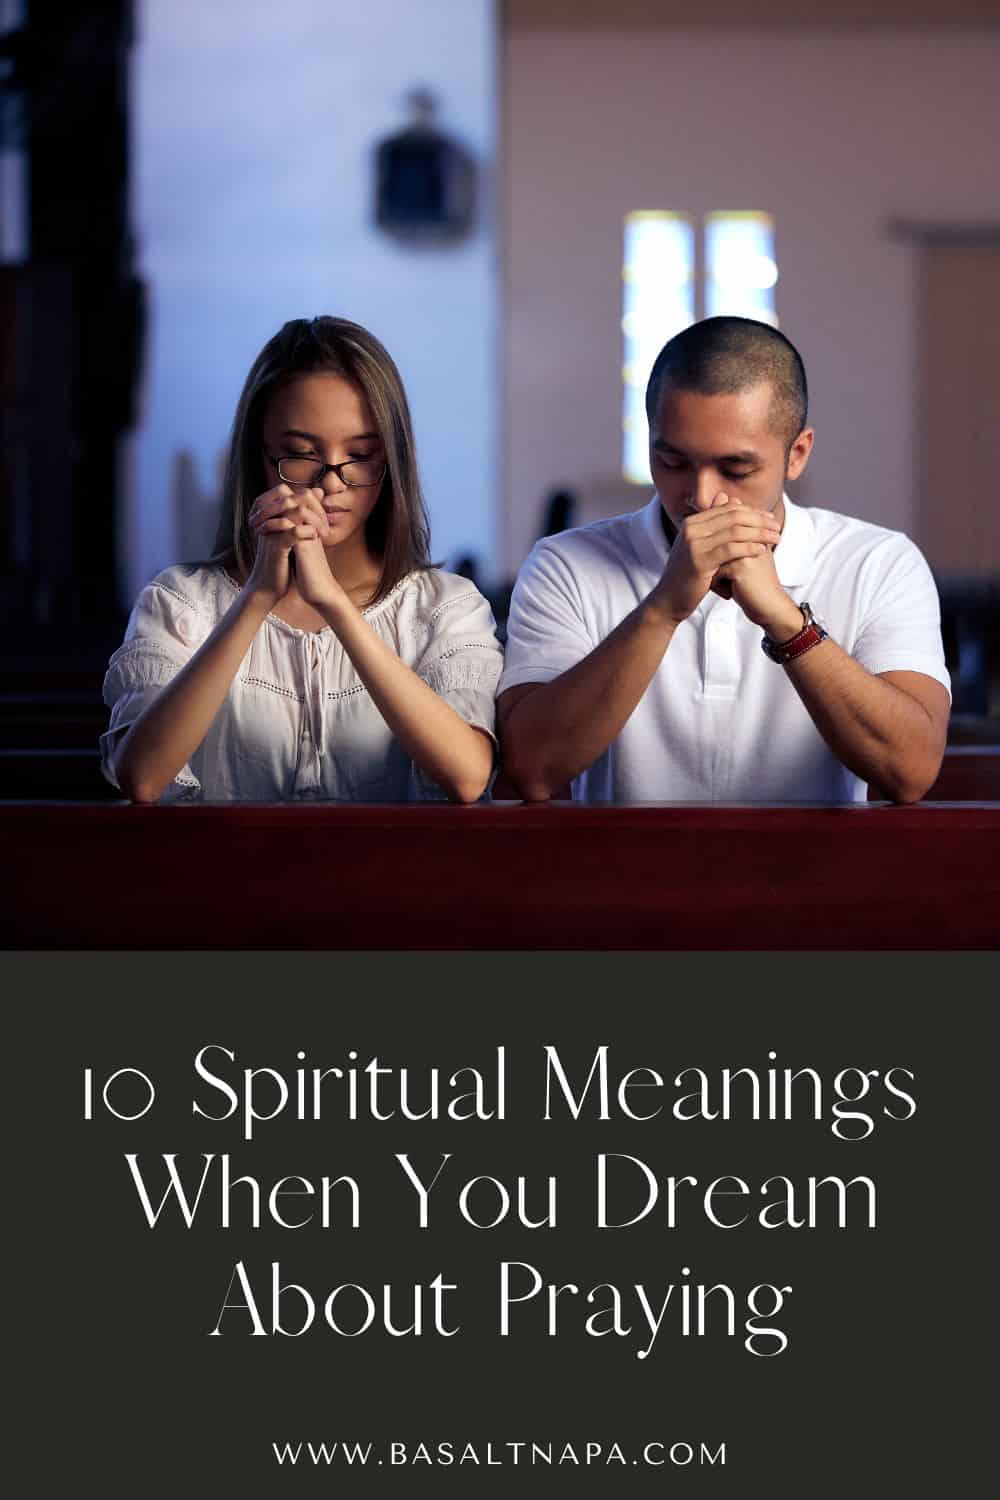 What Does It Mean If You Dream About Praying?